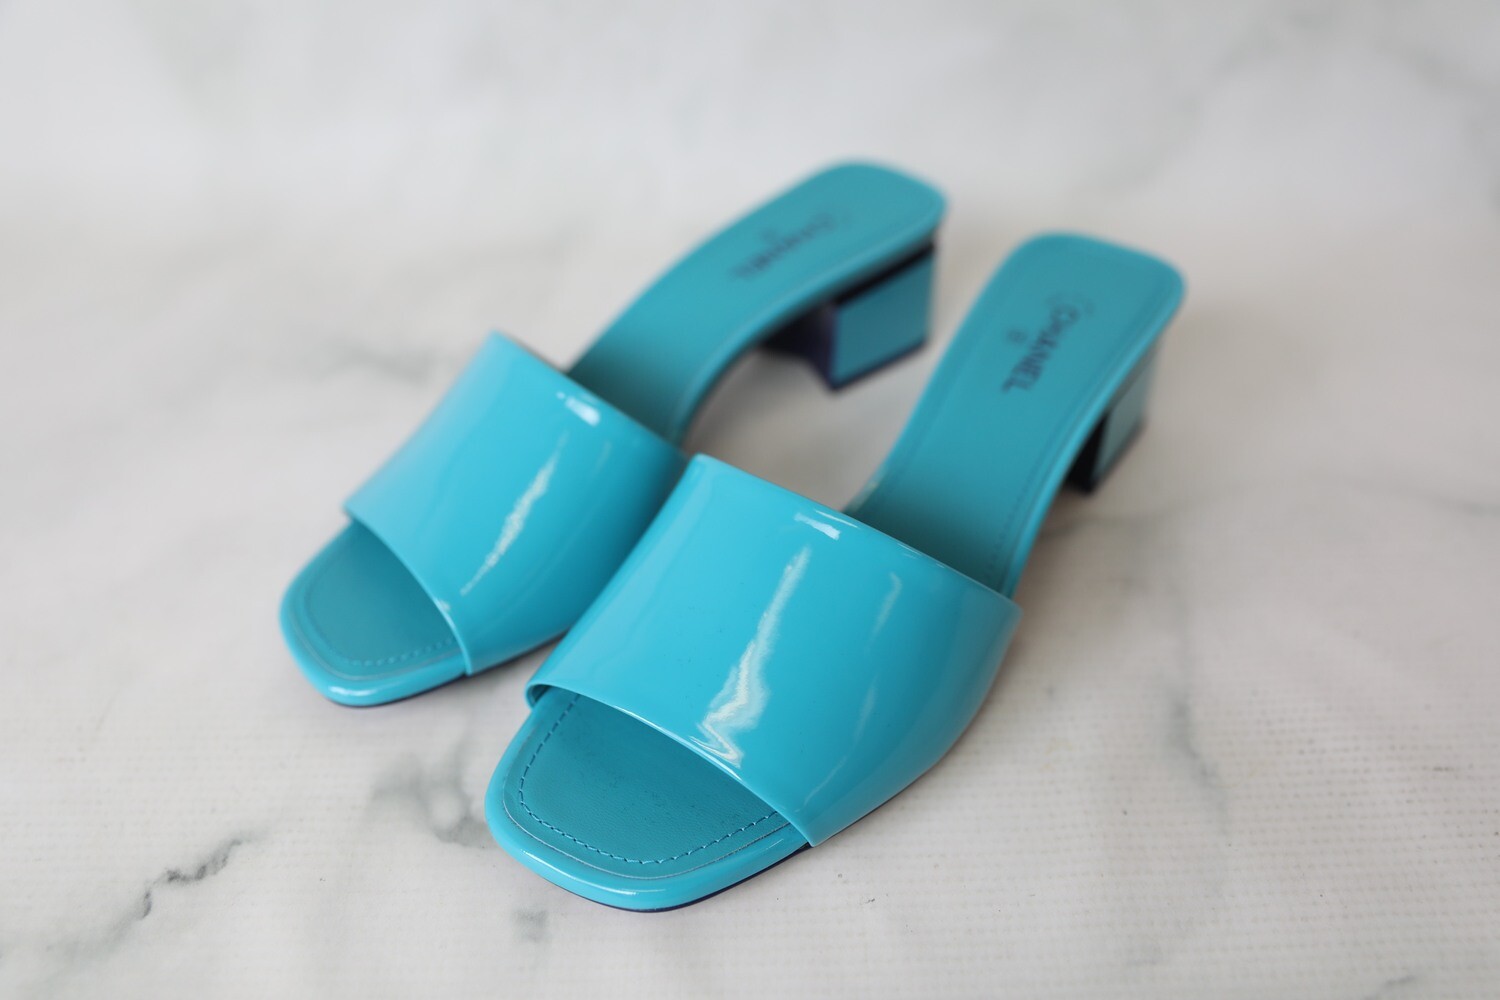 Chanel Shoes Slide Mules with Mid Heel, Blue, Size 41, New in Box GA006